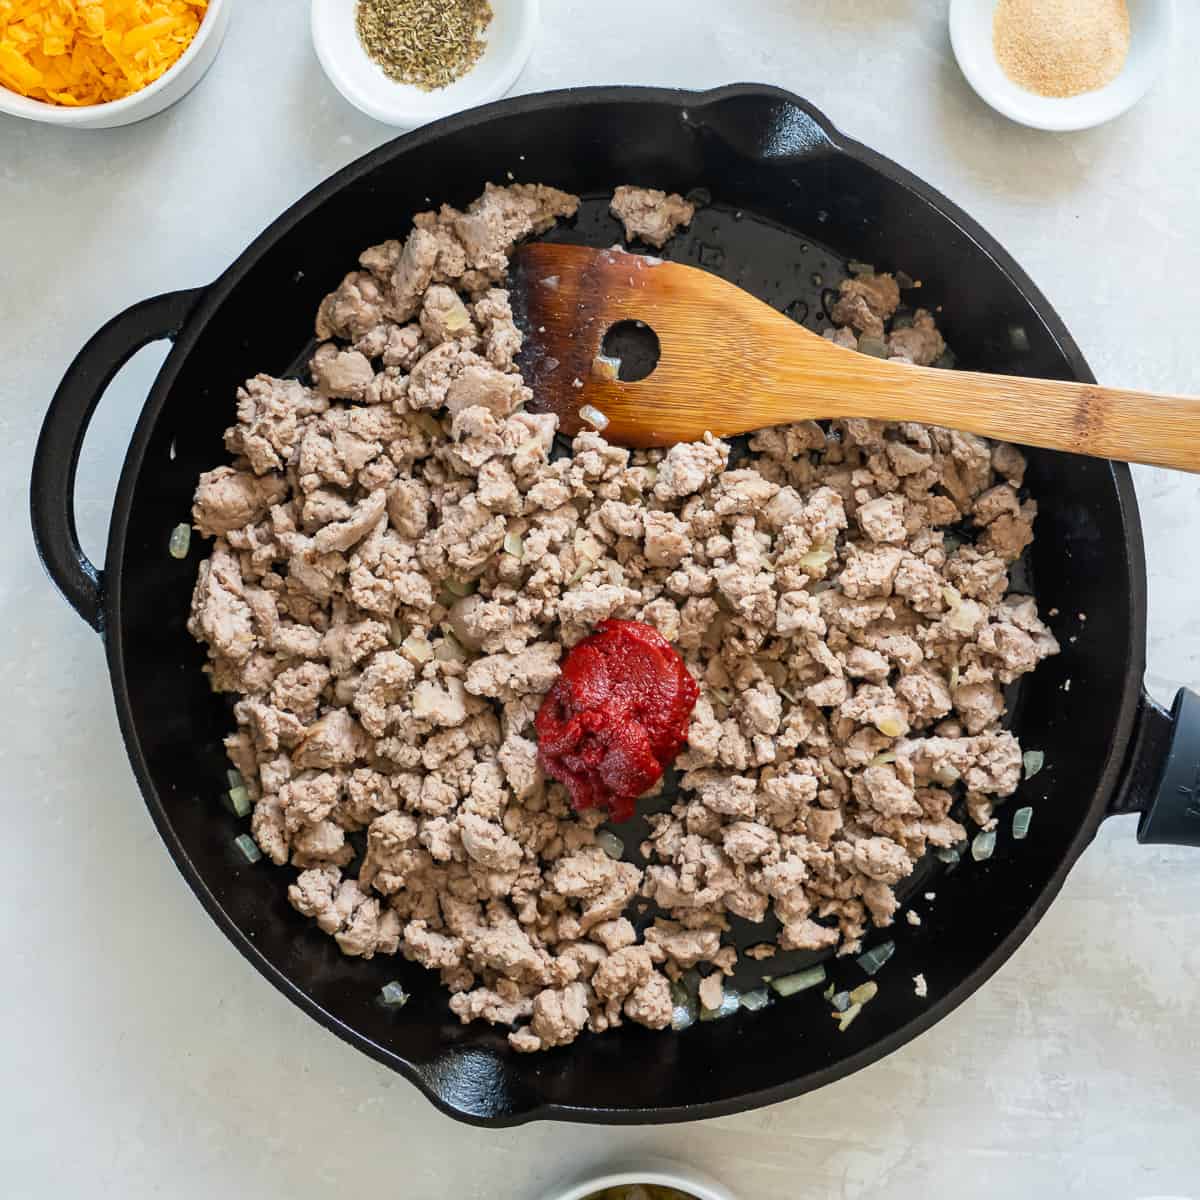 Tomato paste on top of cooked ground turkey in a cast iron skillet with a wooden spatula.